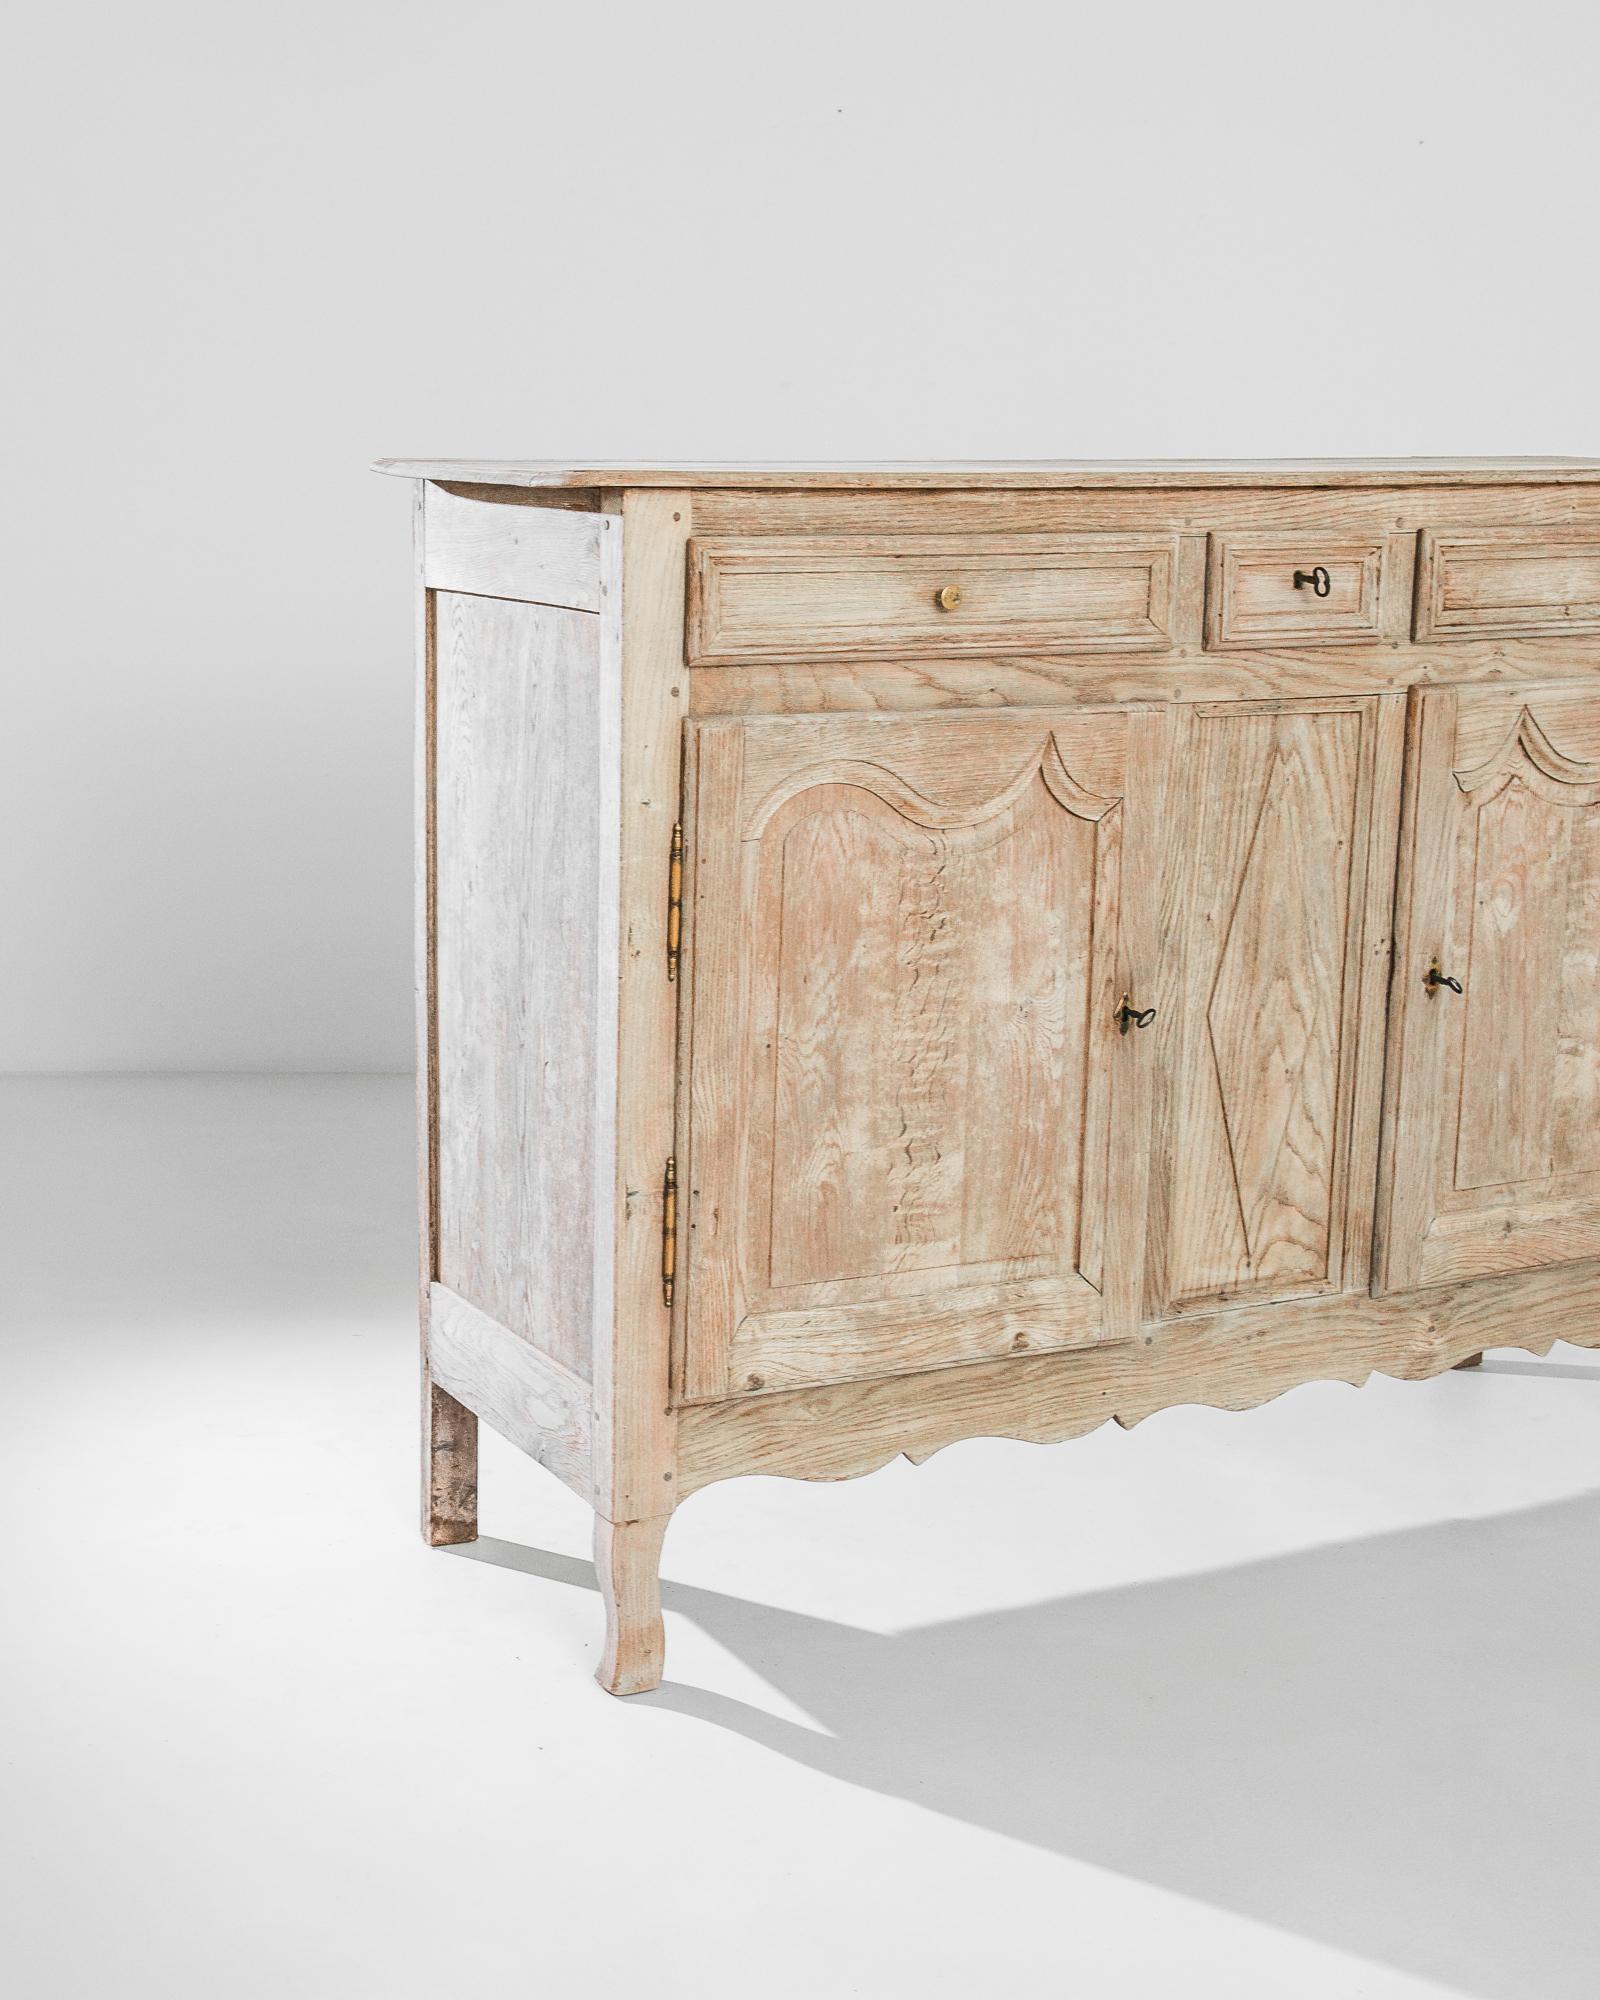 An oak buffet from 1860s France. The delicate finish of the restored wood, flushed with pale rose pink notes, accentuates the fluid curves and peaks of paneling and apron. A diamond-shaped motif on the central panel is mirrored in the original